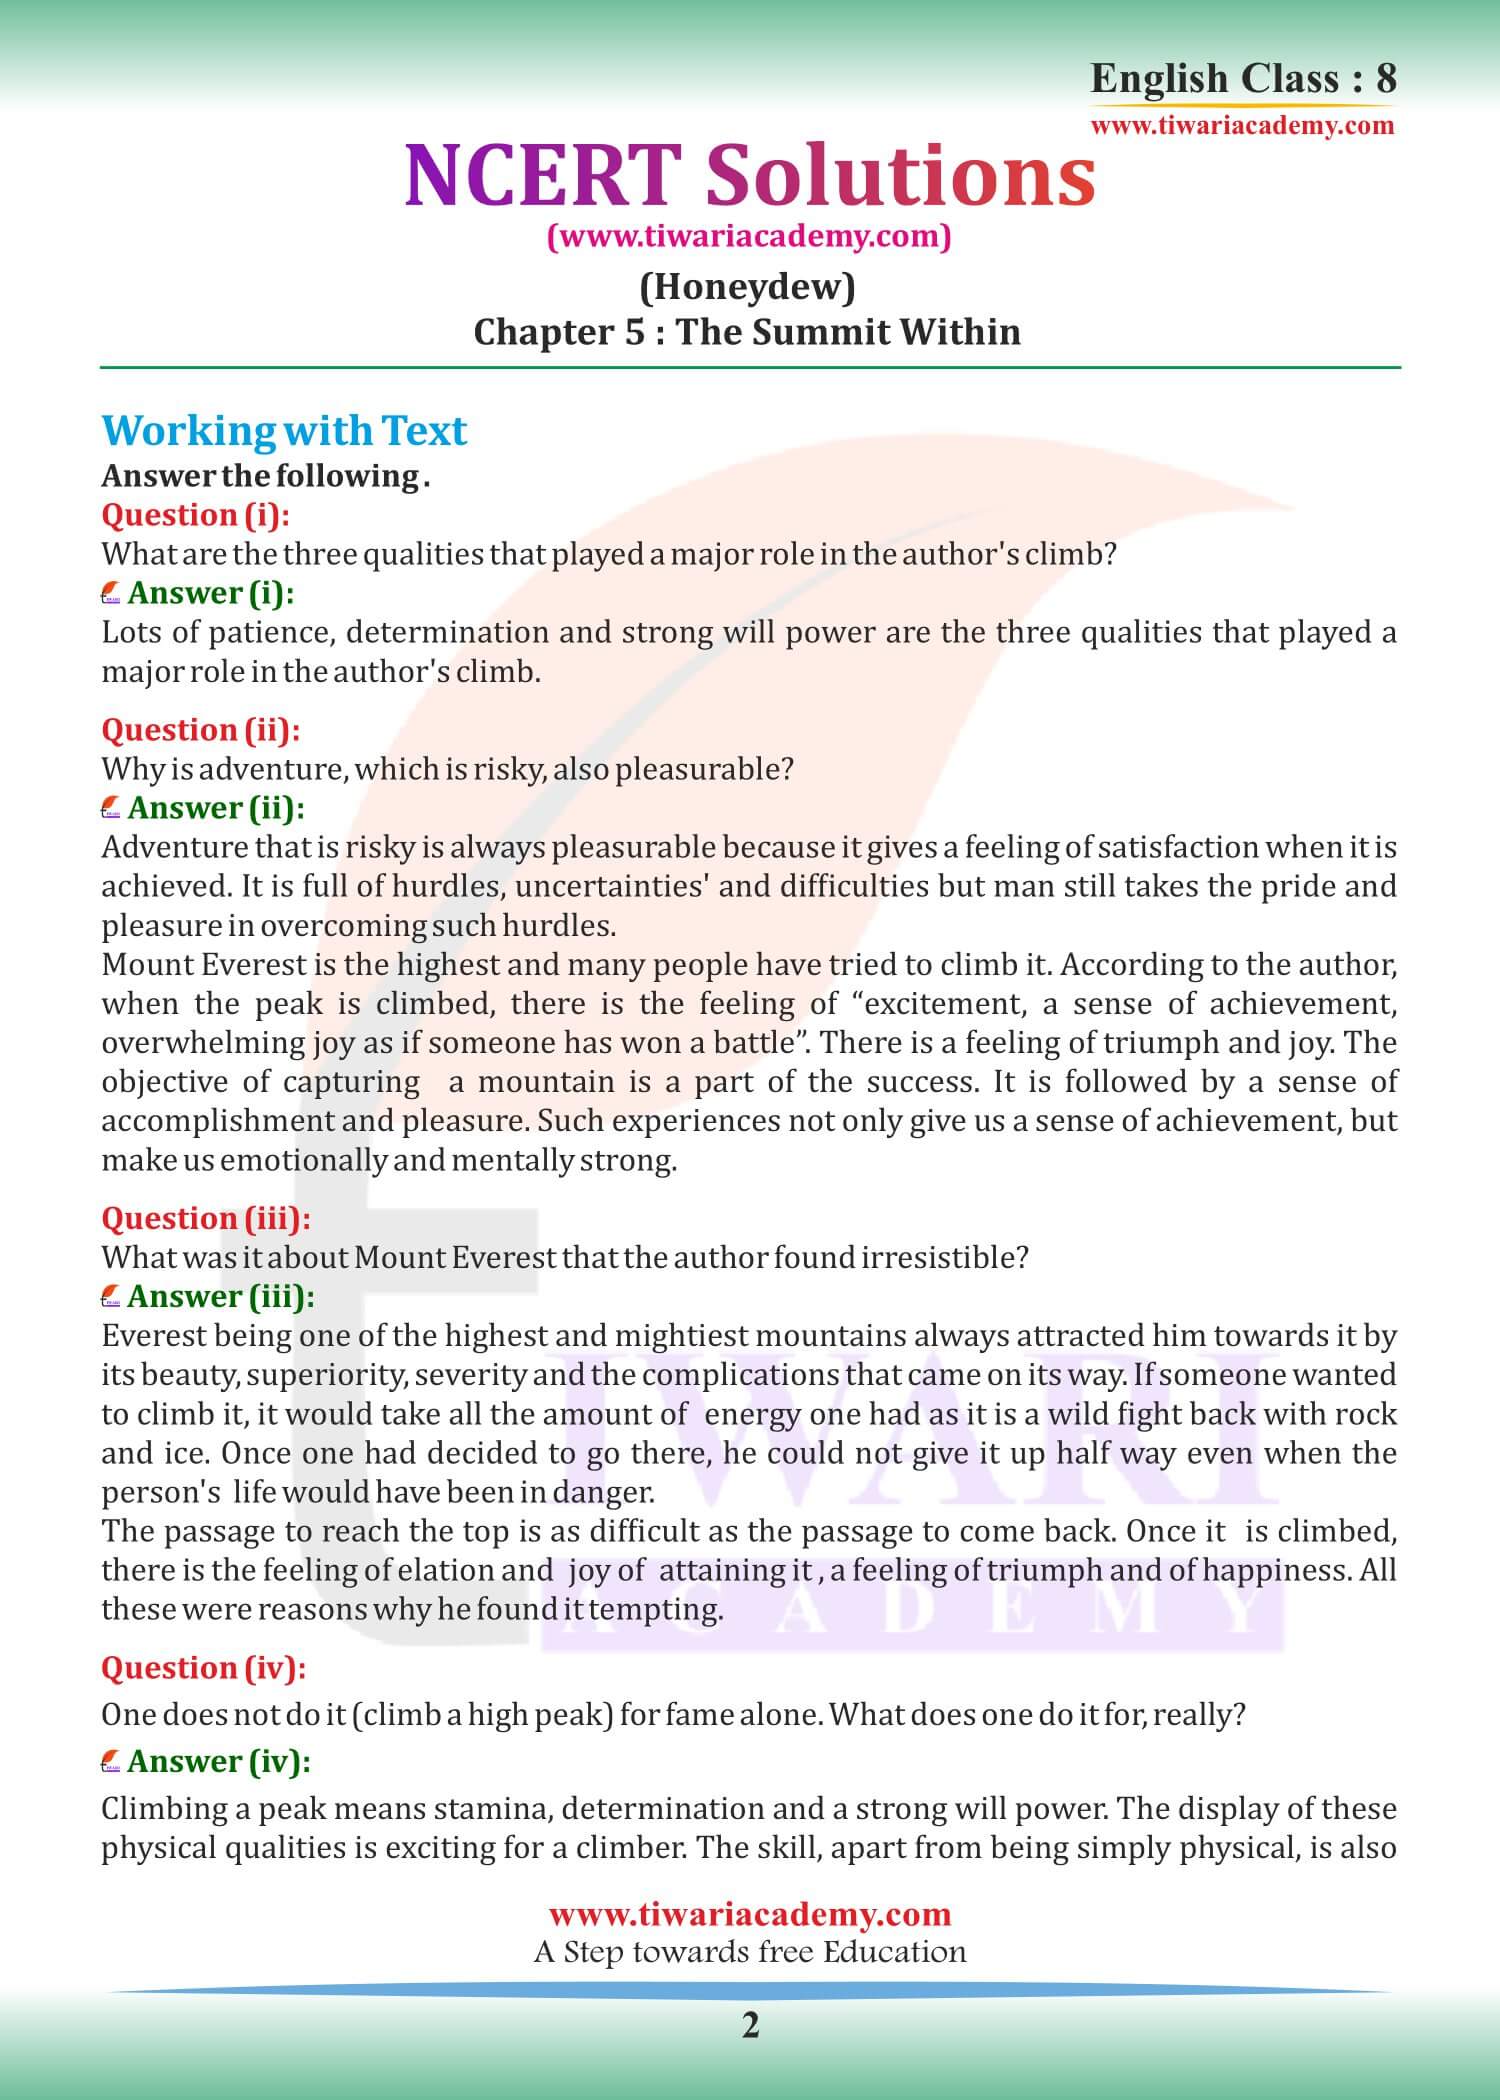 Class 8 English Honeydew Chapter 5 The Summit Within